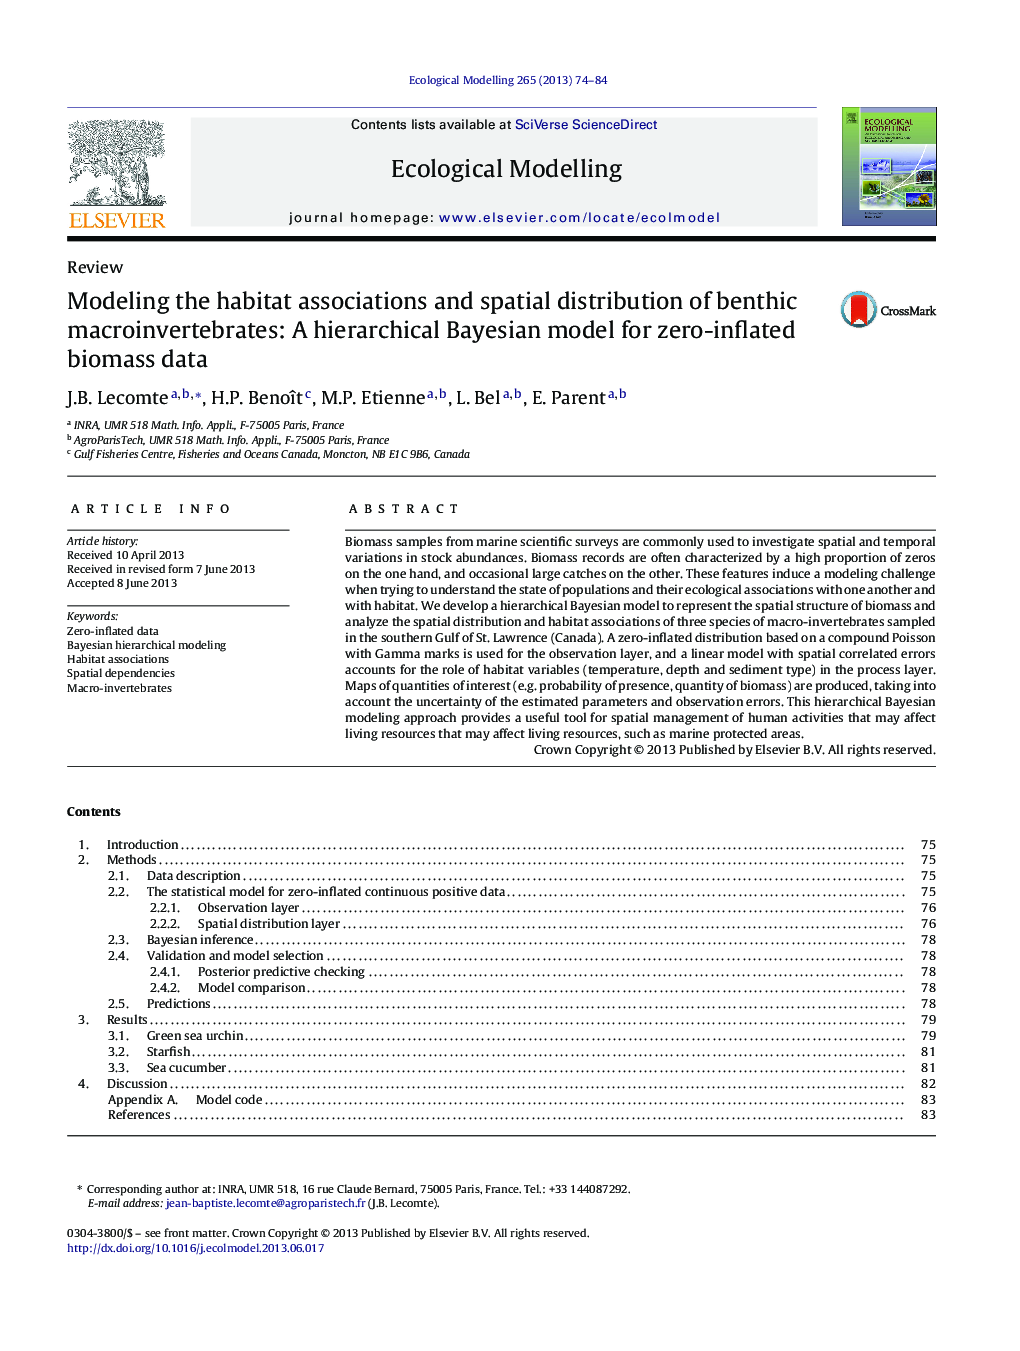 Modeling the habitat associations and spatial distribution of benthic macroinvertebrates: A hierarchical Bayesian model for zero-inflated biomass data